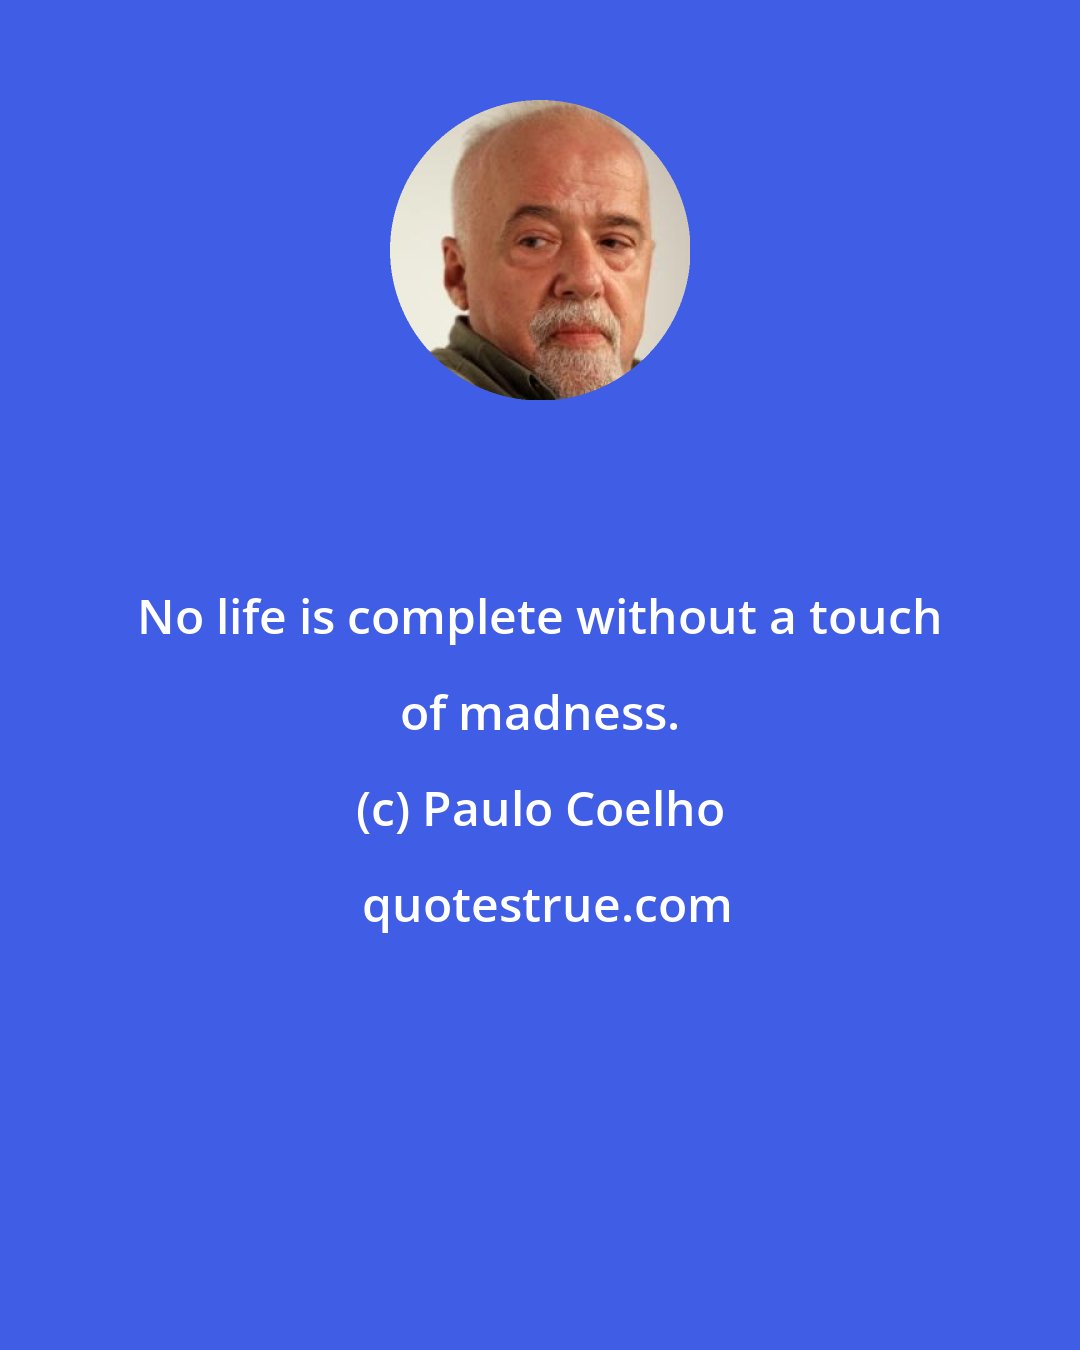 Paulo Coelho: No life is complete without a touch of madness.